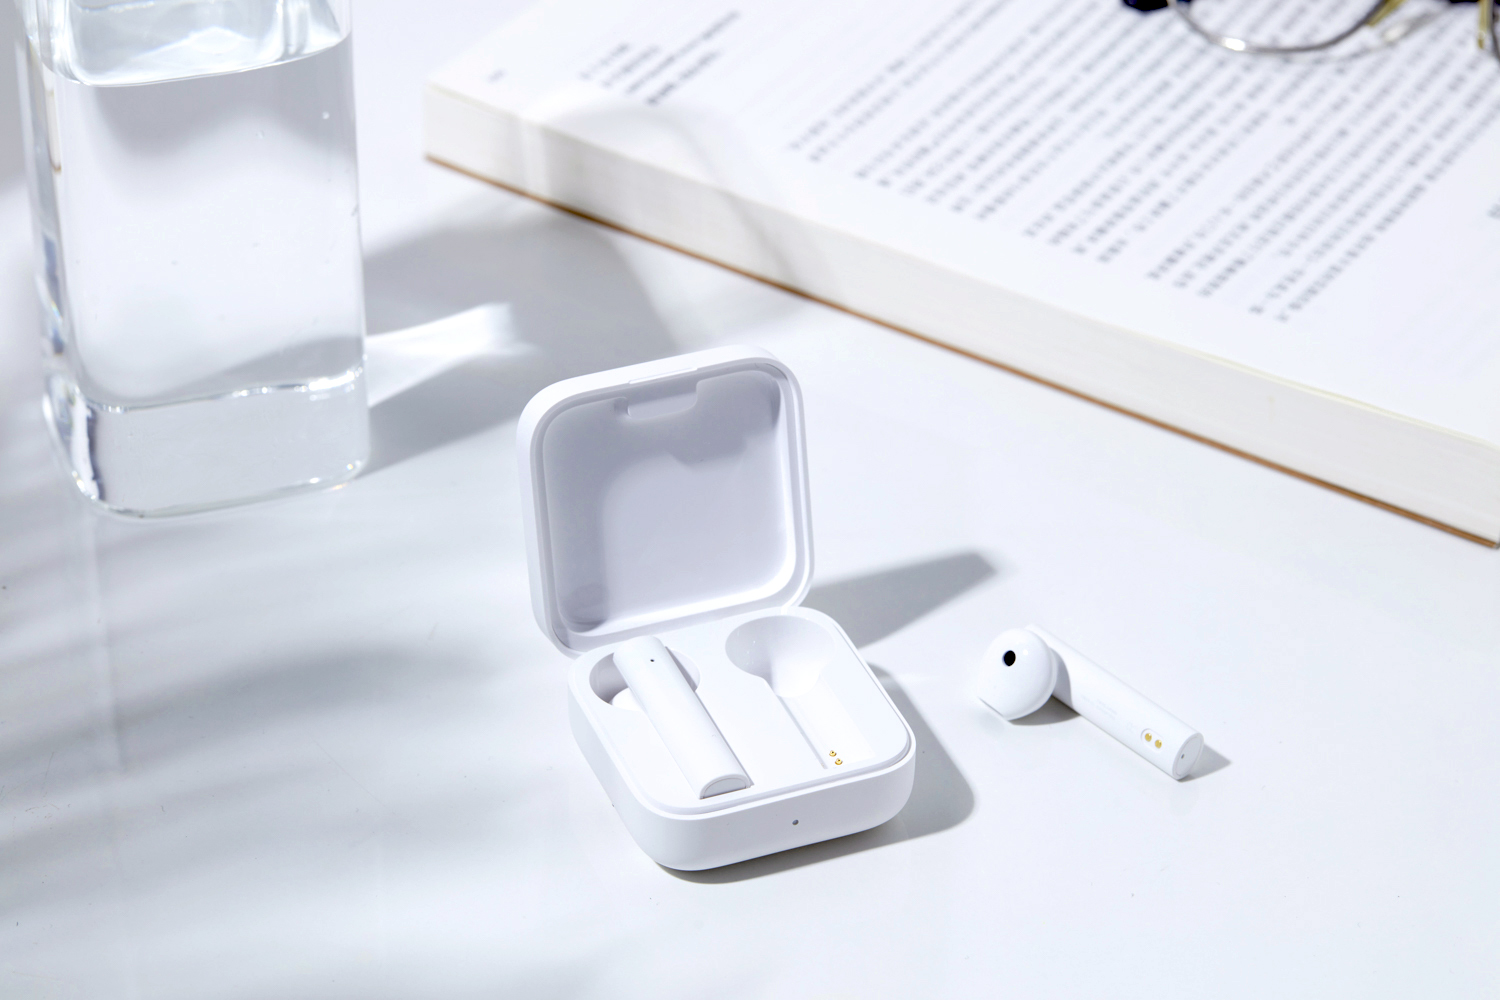 Xiaomi Mi True Wireless Earphones 2 Basic: Apple Airpods Clones That Sell For €39.99 With Up To 20 Hours Of Battery Life - Notebookcheck.net News